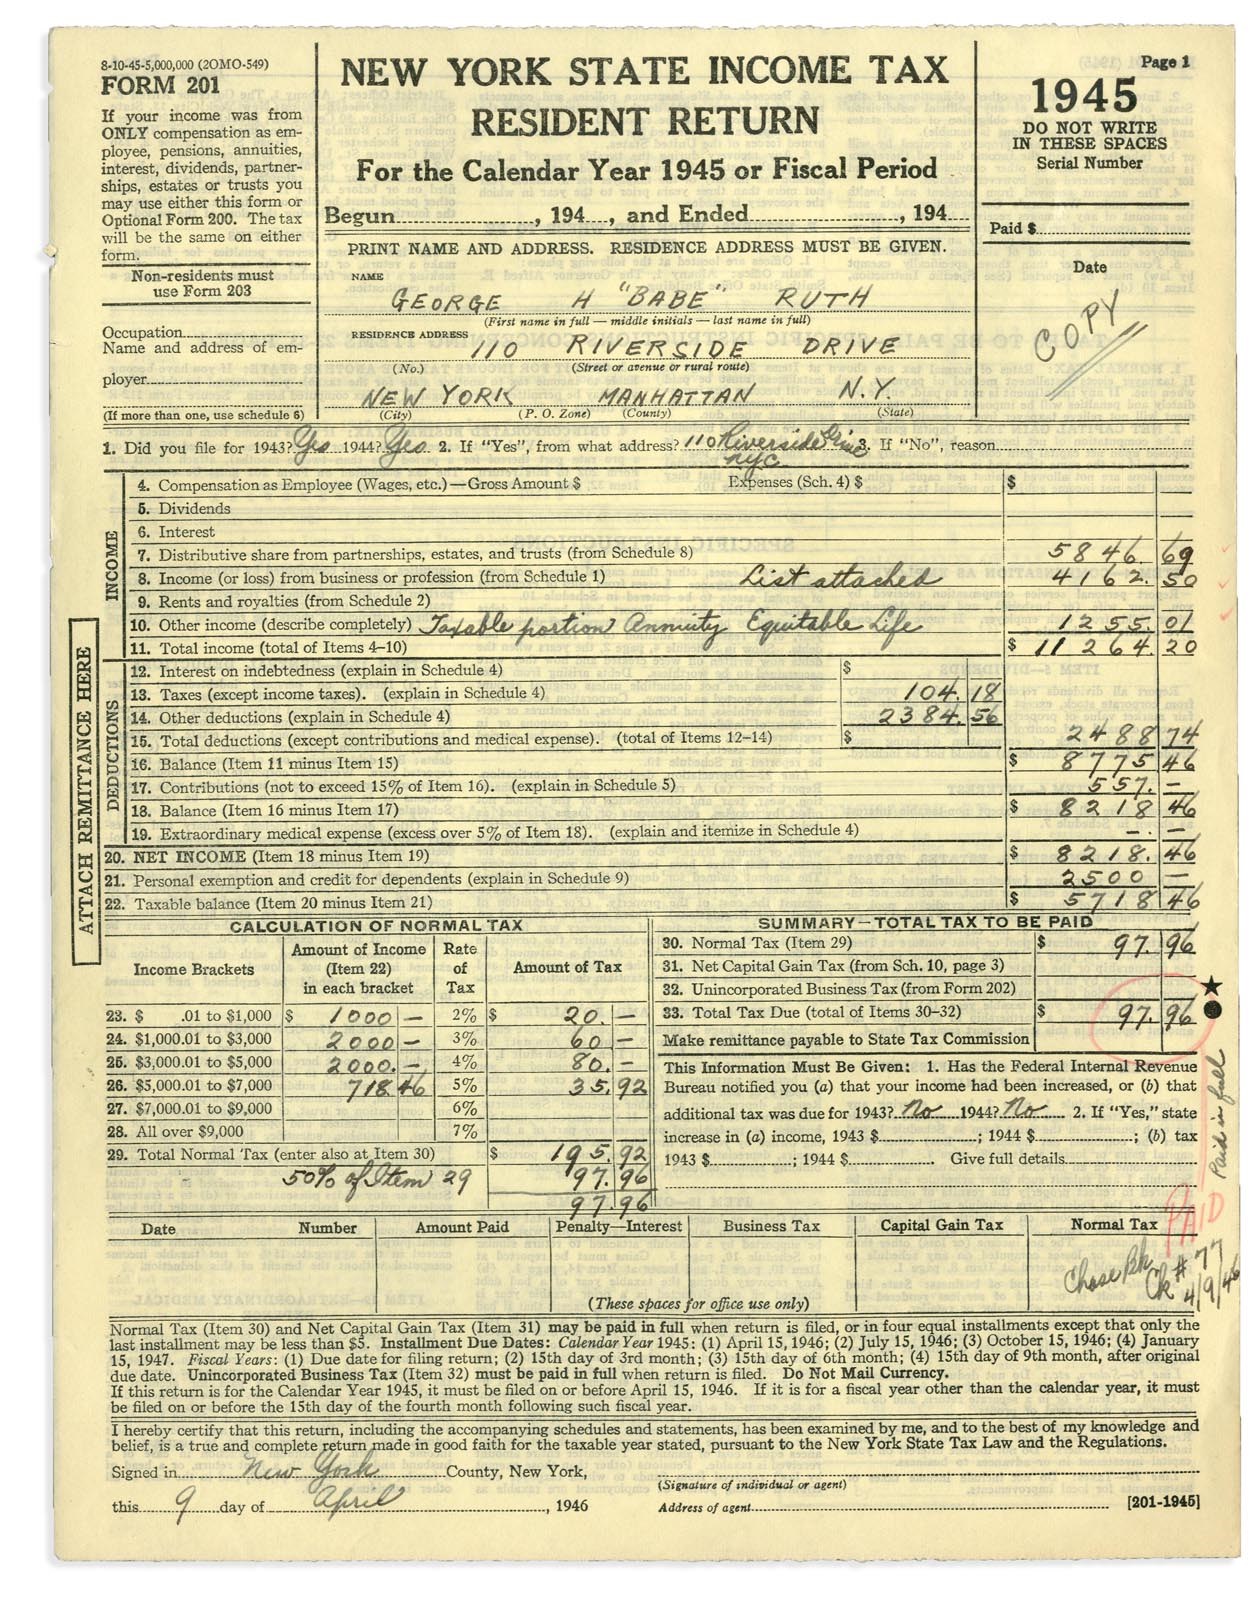 Collection Of Babe Ruth's Right Hand Man - 1945 Babe Ruth N.Y. State Income Tax Return